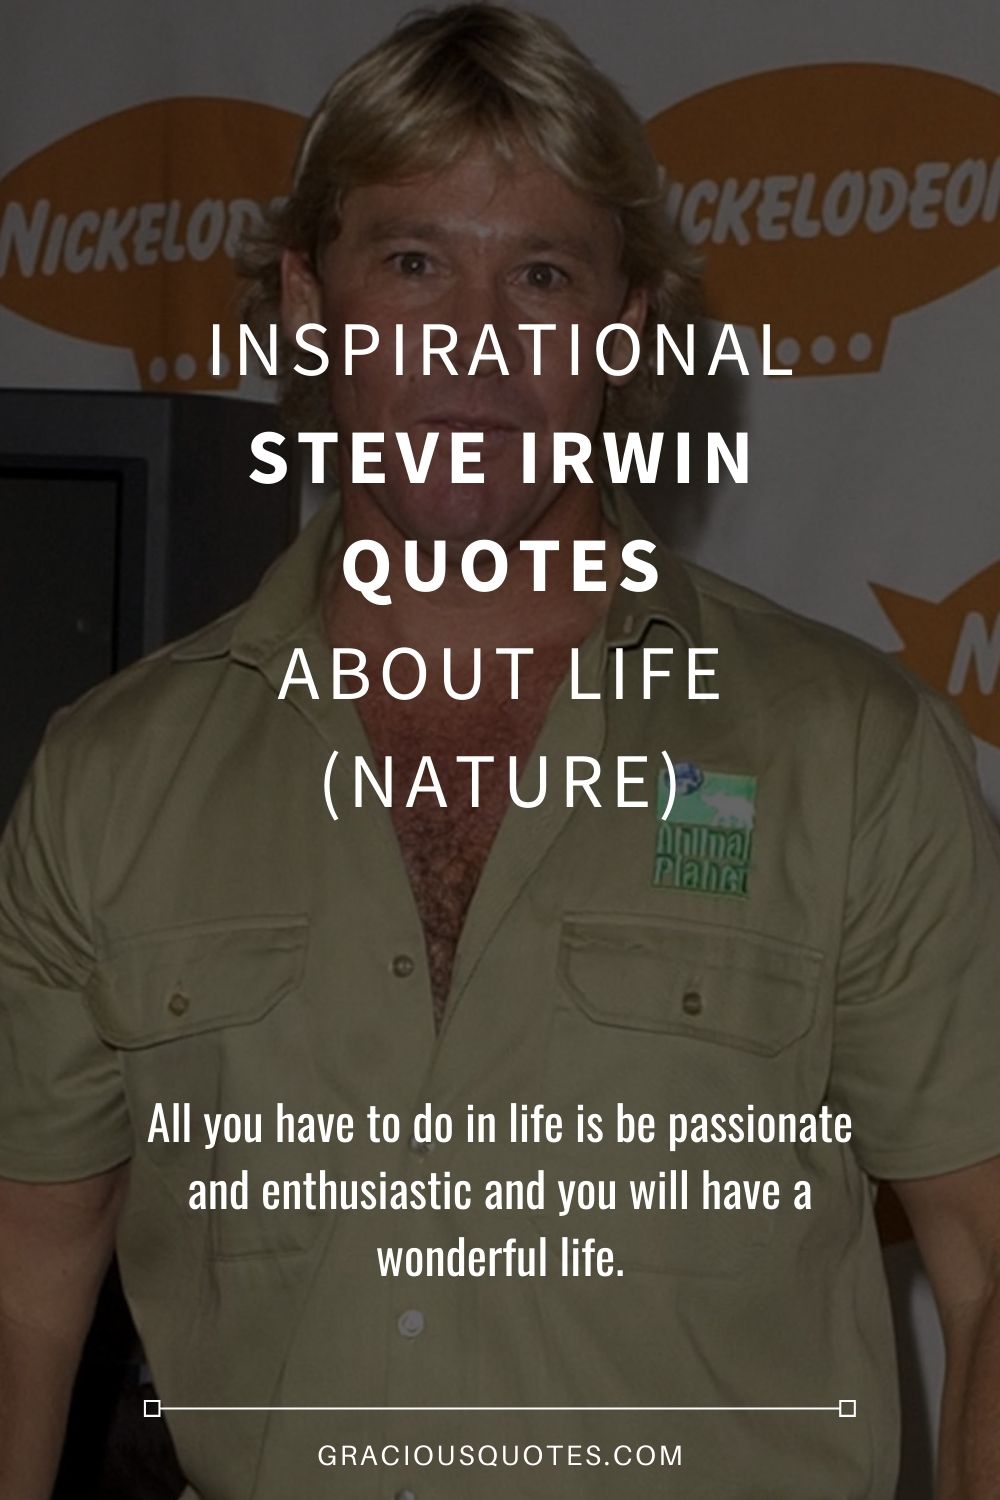 Inspirational Steve Irwin Quotes About Life (NATURE) - Gracious Quotes